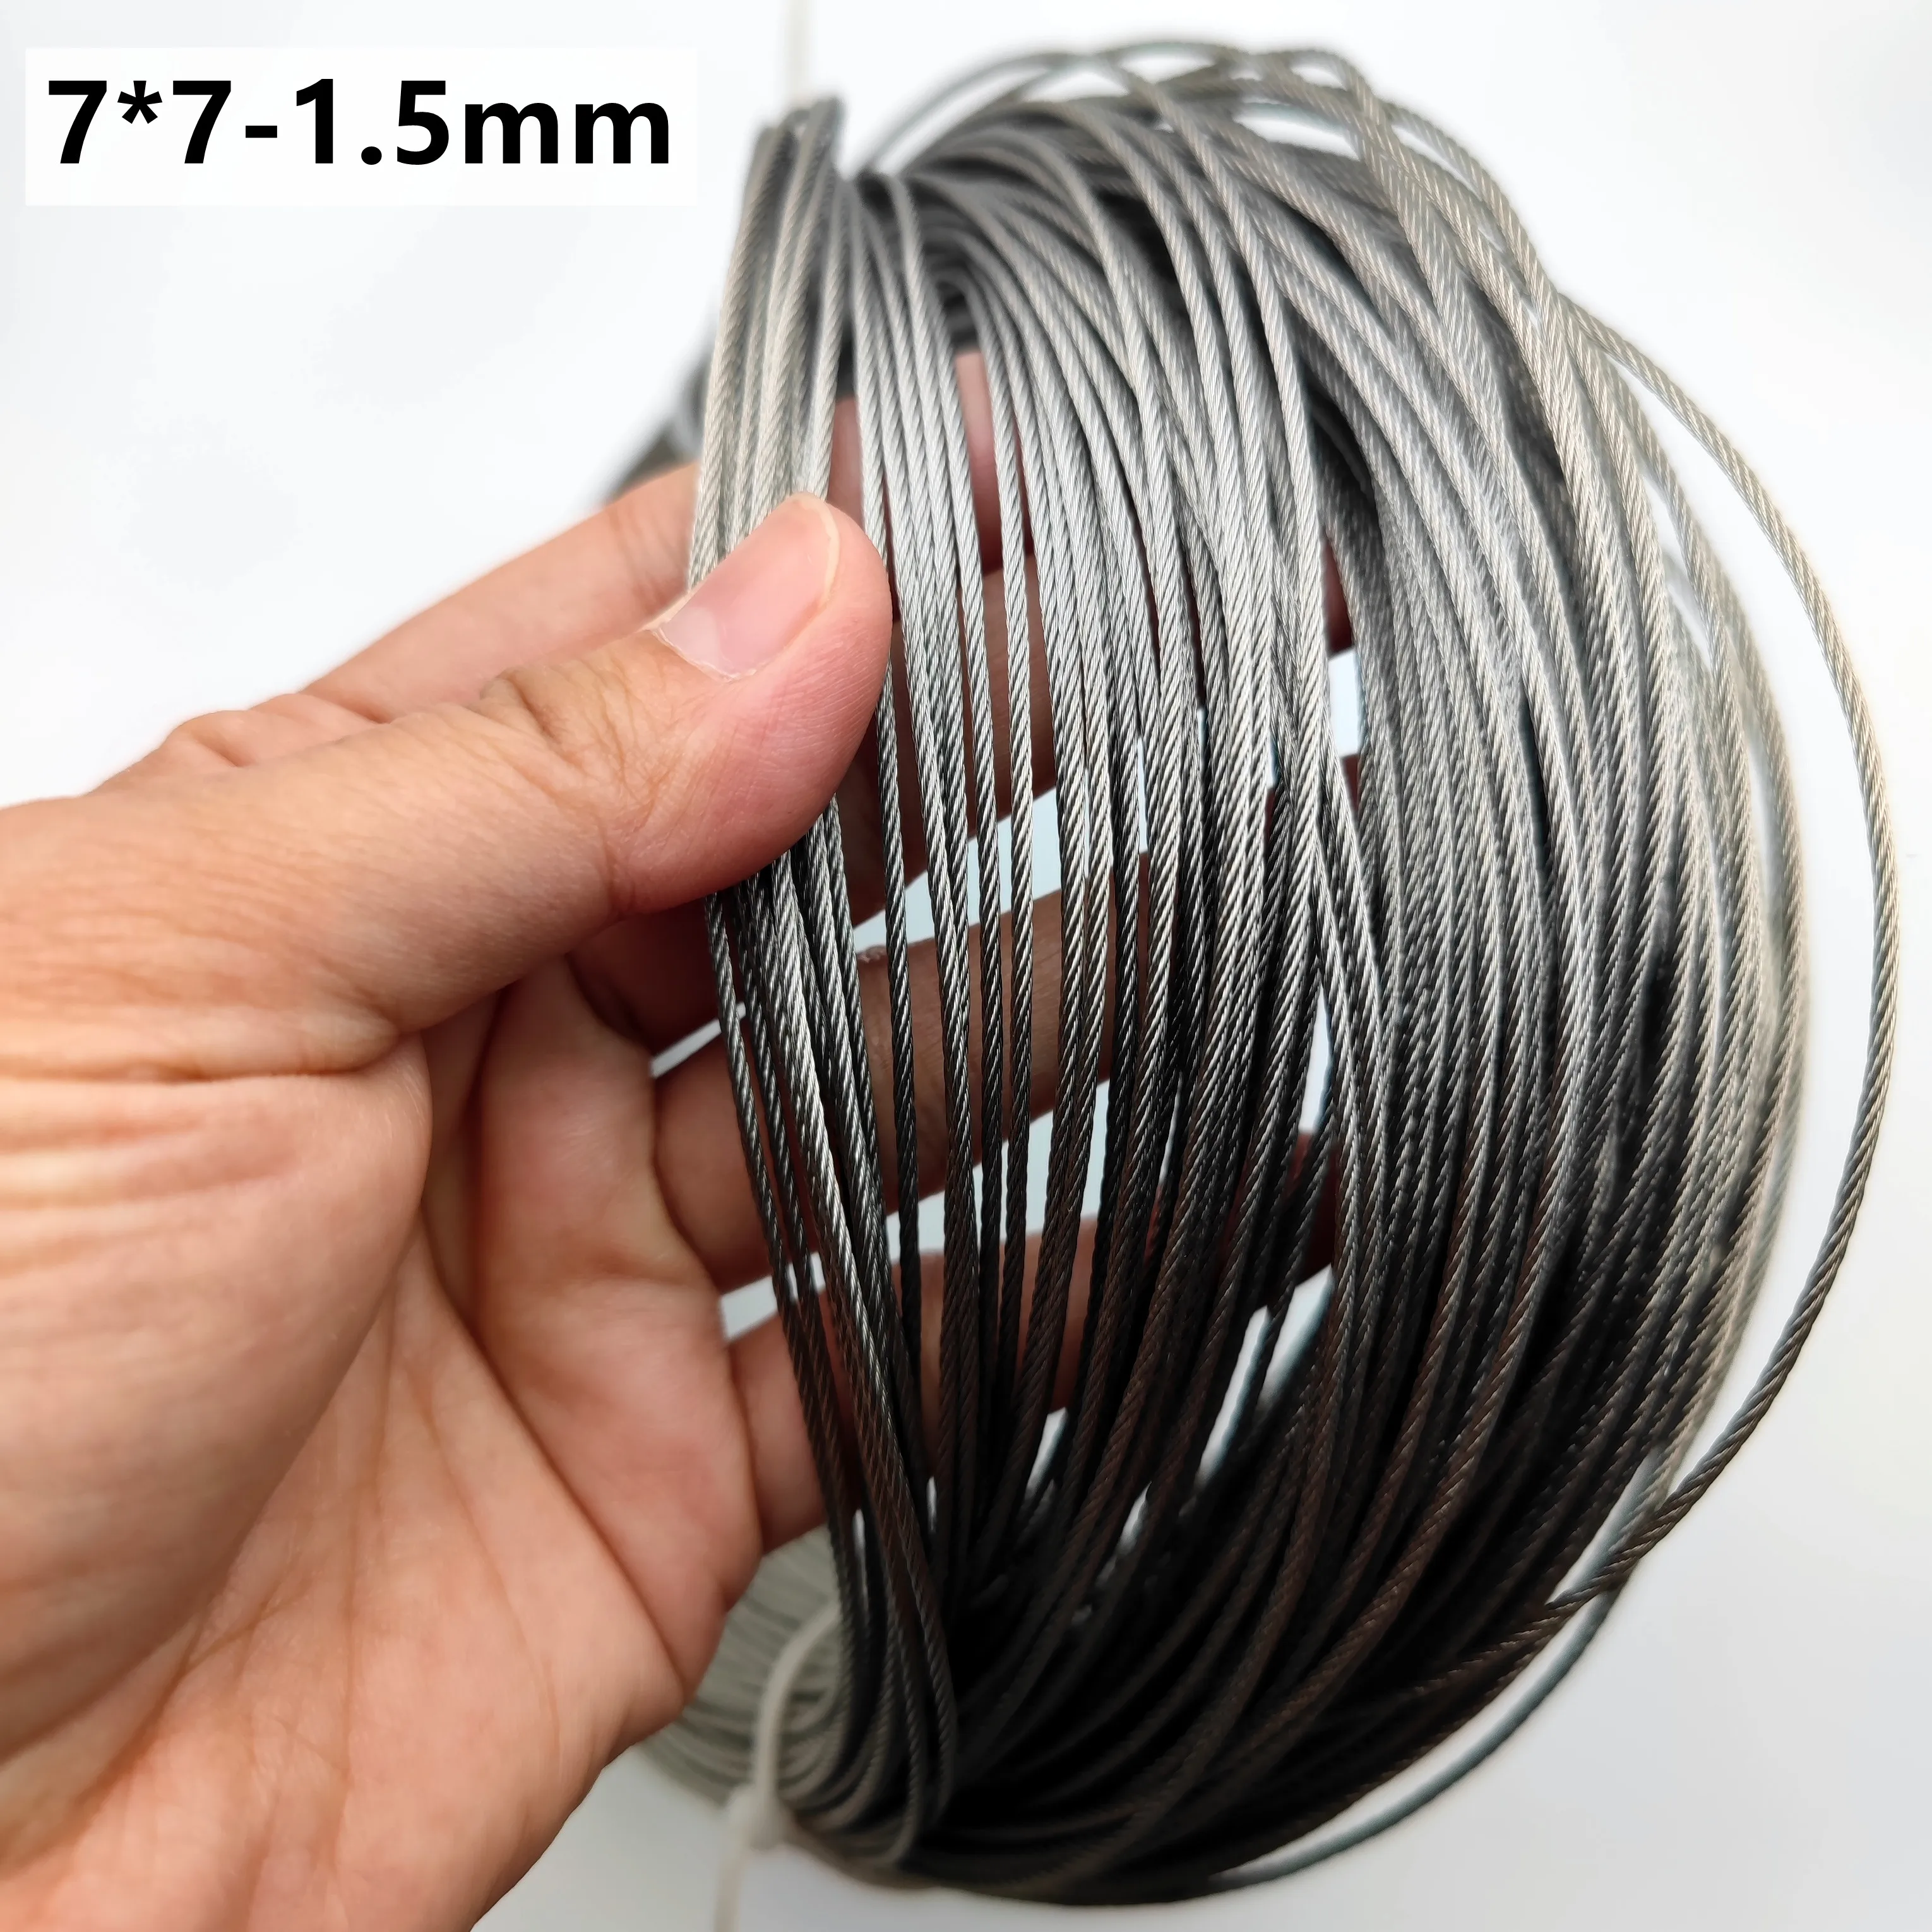 50M/100M/200M 1.5mm Diameter 7X7 Construction 304 Stainless steel Wire rope Alambre Softer Fishing Lifting Cable pvc coating 50m 100m 1mm 1 2mm 7x7 construction 304 stainless steel wire rope softer fishing lifting cable